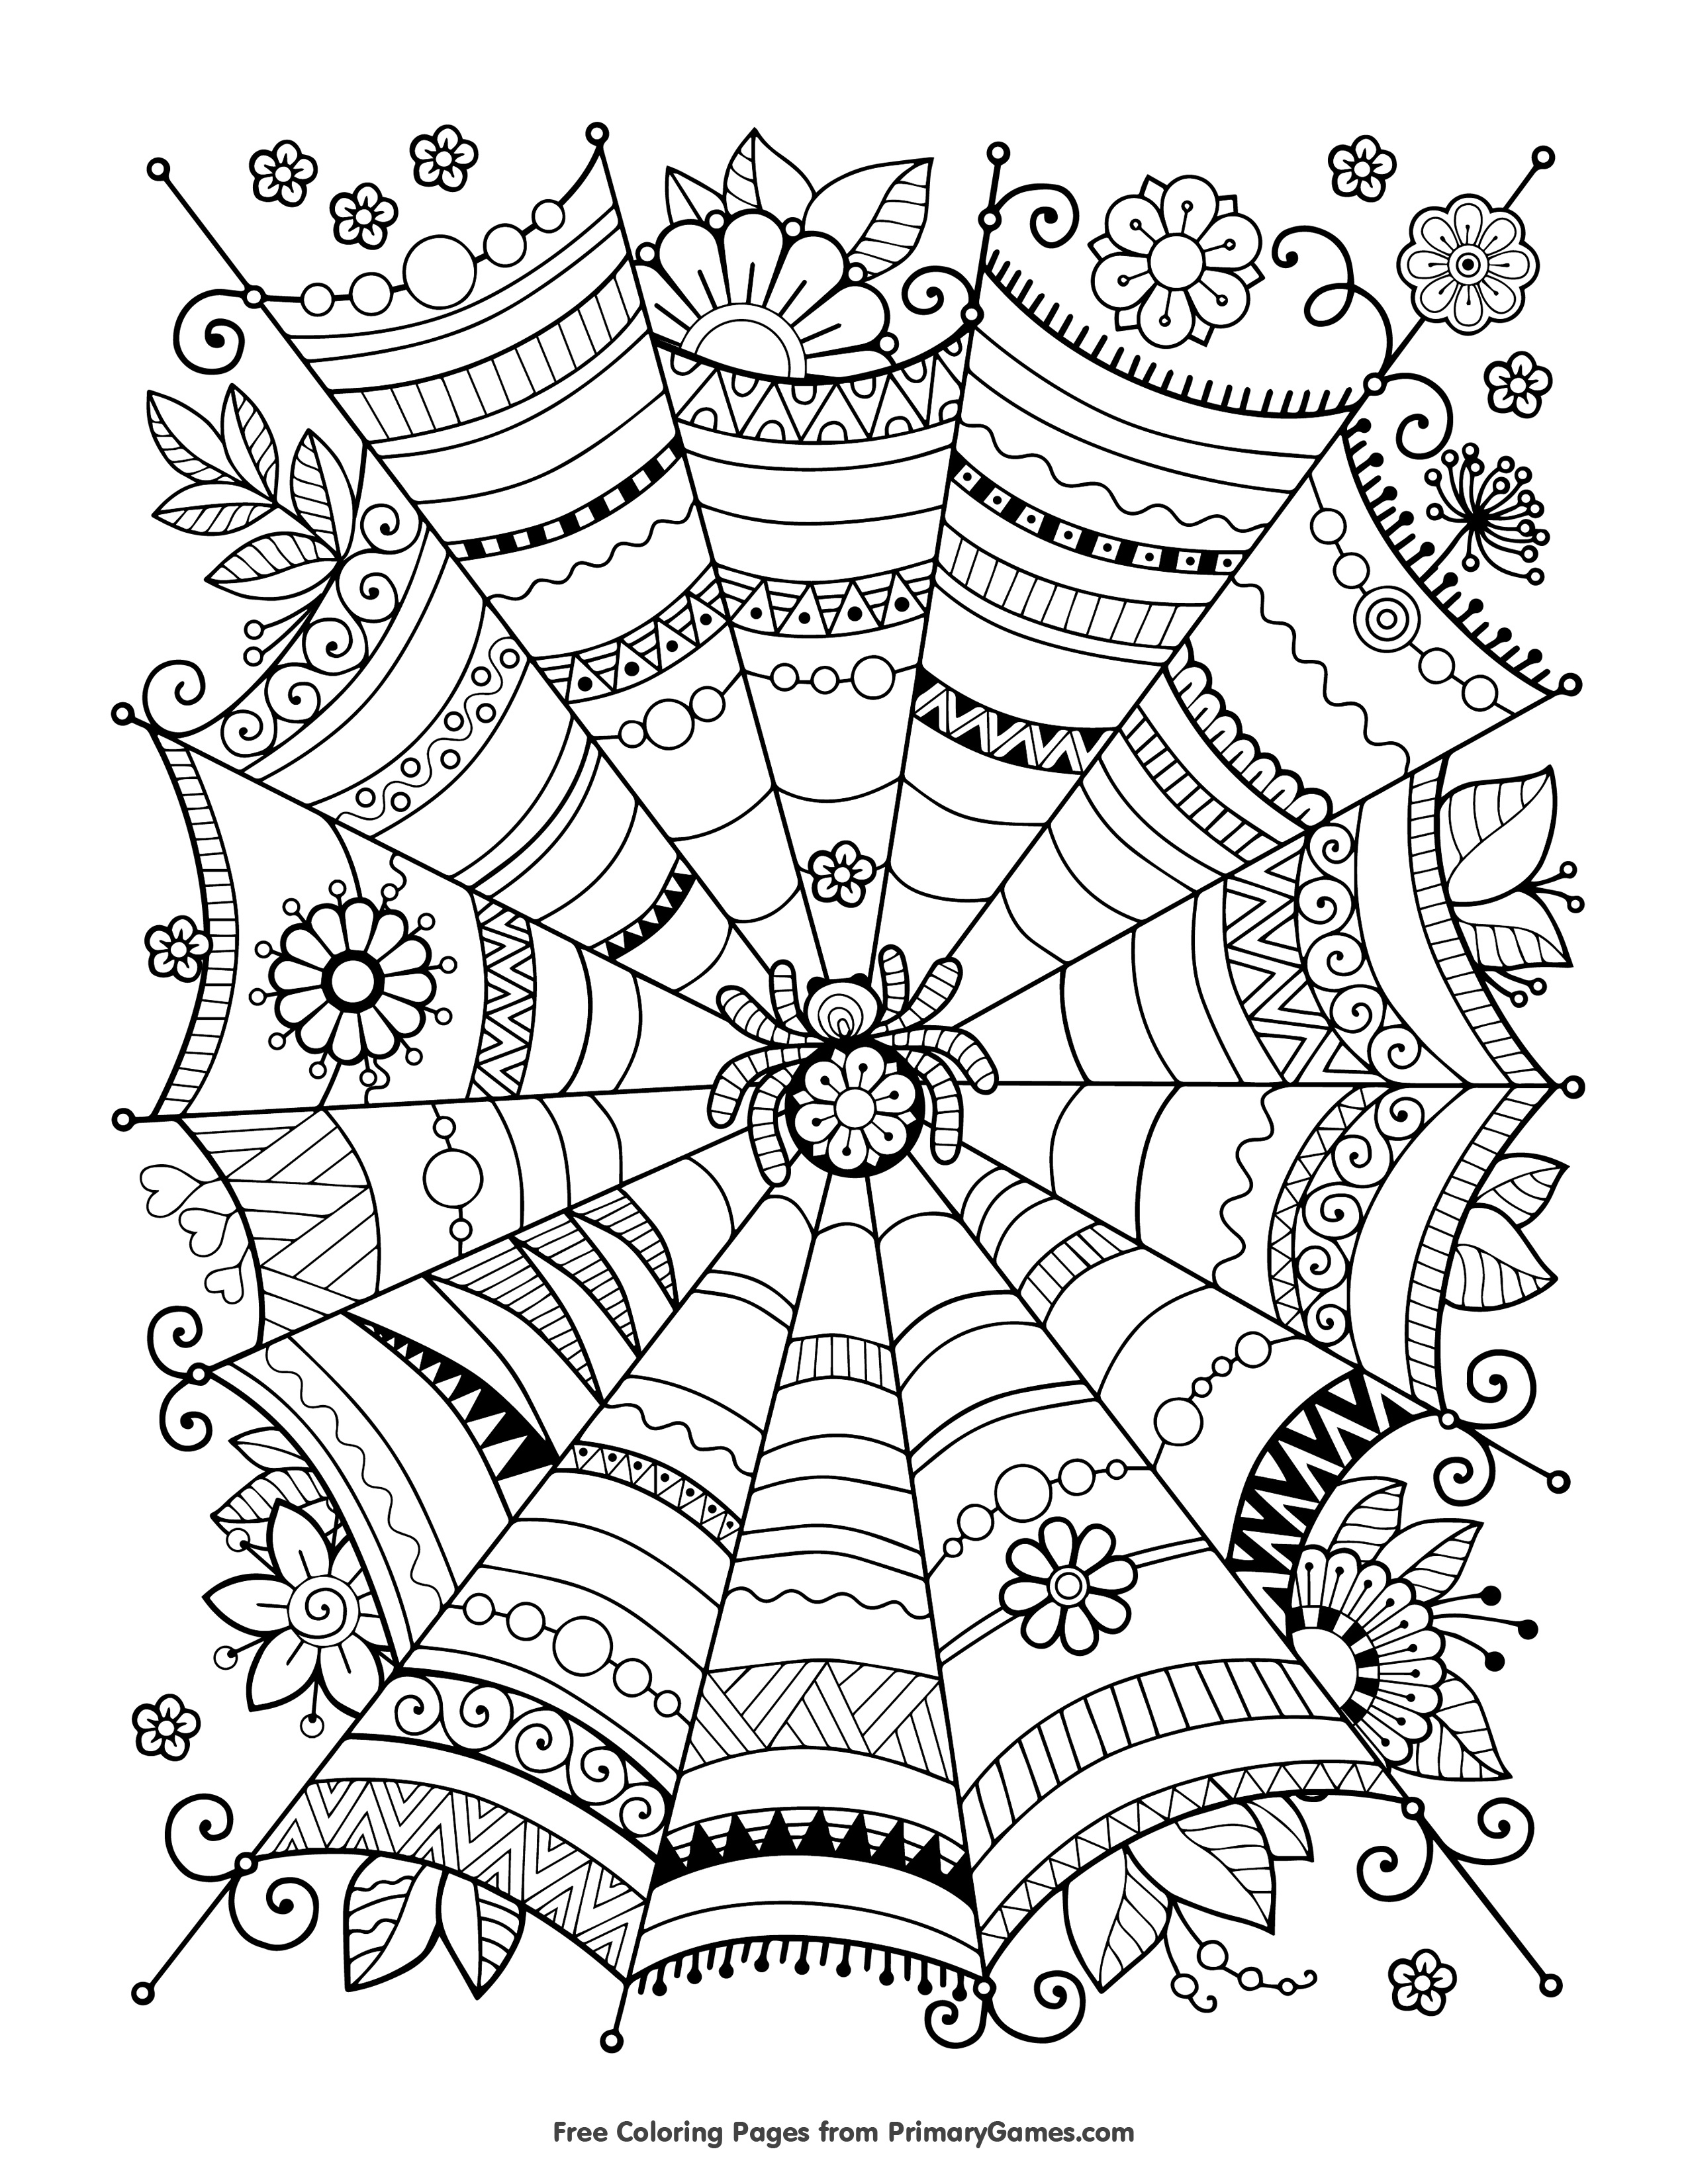 Free Halloween Coloring Pages For Adults &amp;amp; Kids - Happiness Is Homemade - Free Coloring Pages Com Printable